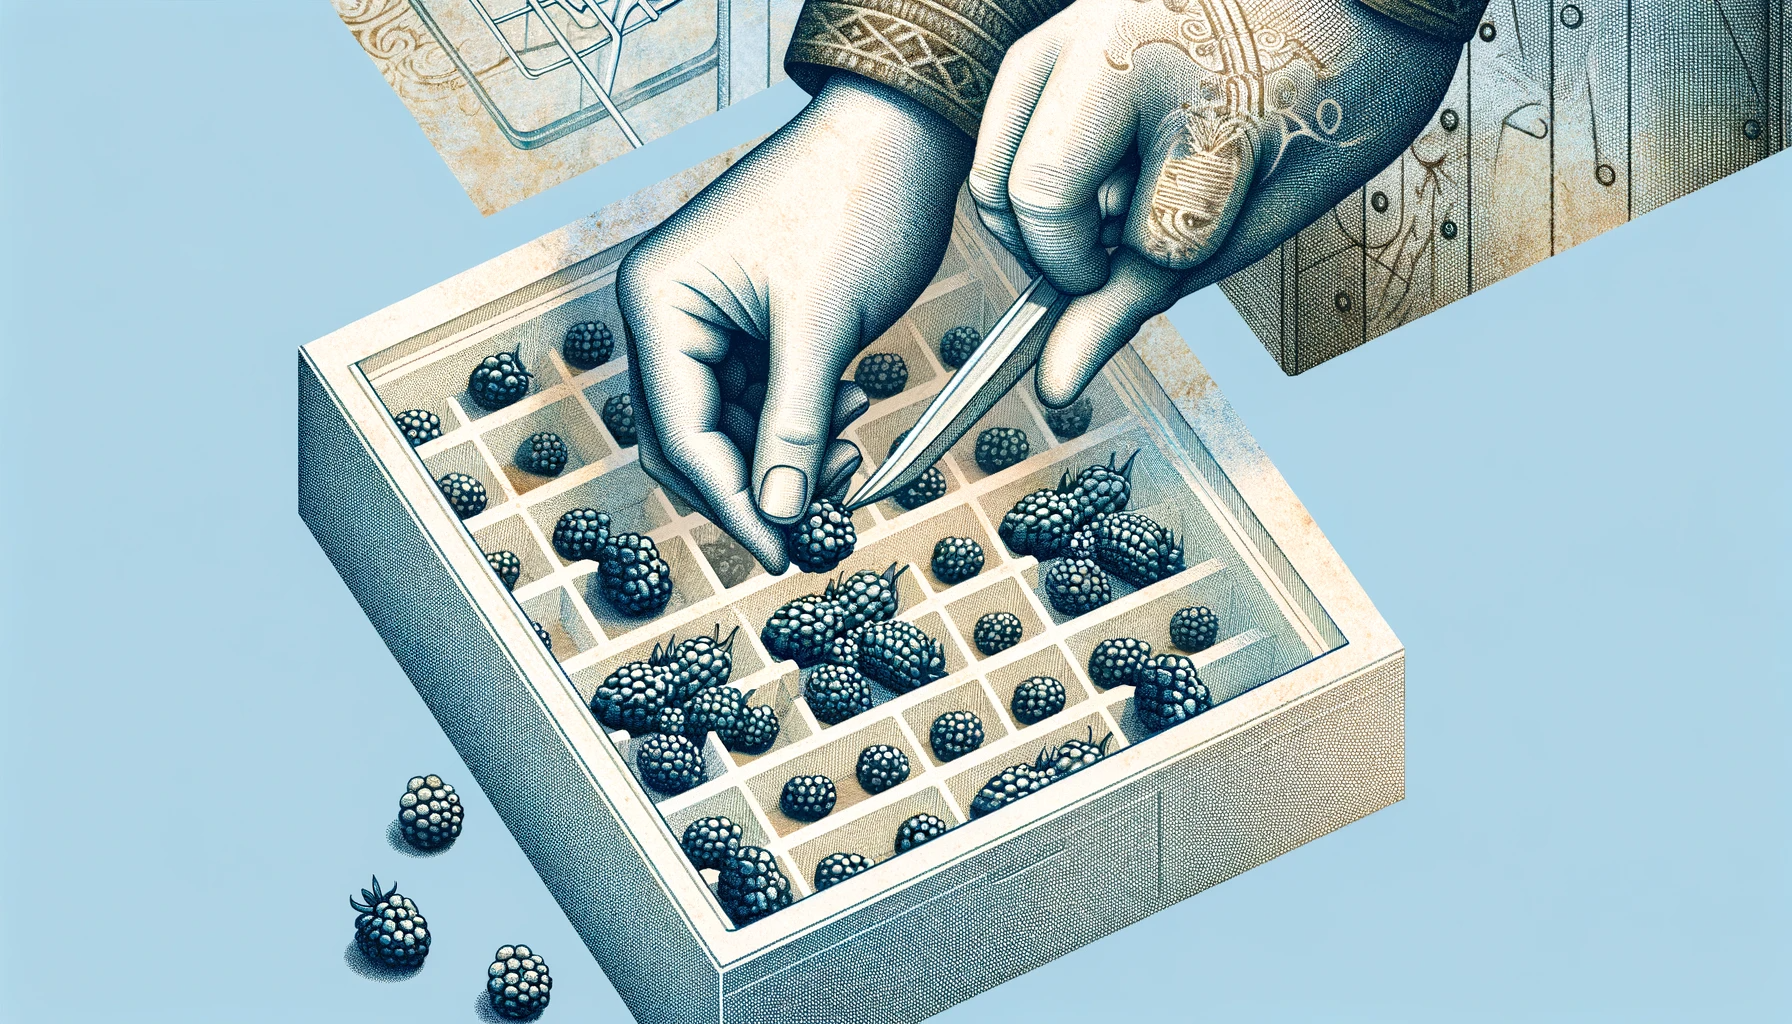 Frozen Blackberries Being Placed Into A Freezer By Human Hands Set On A Light Blue Background